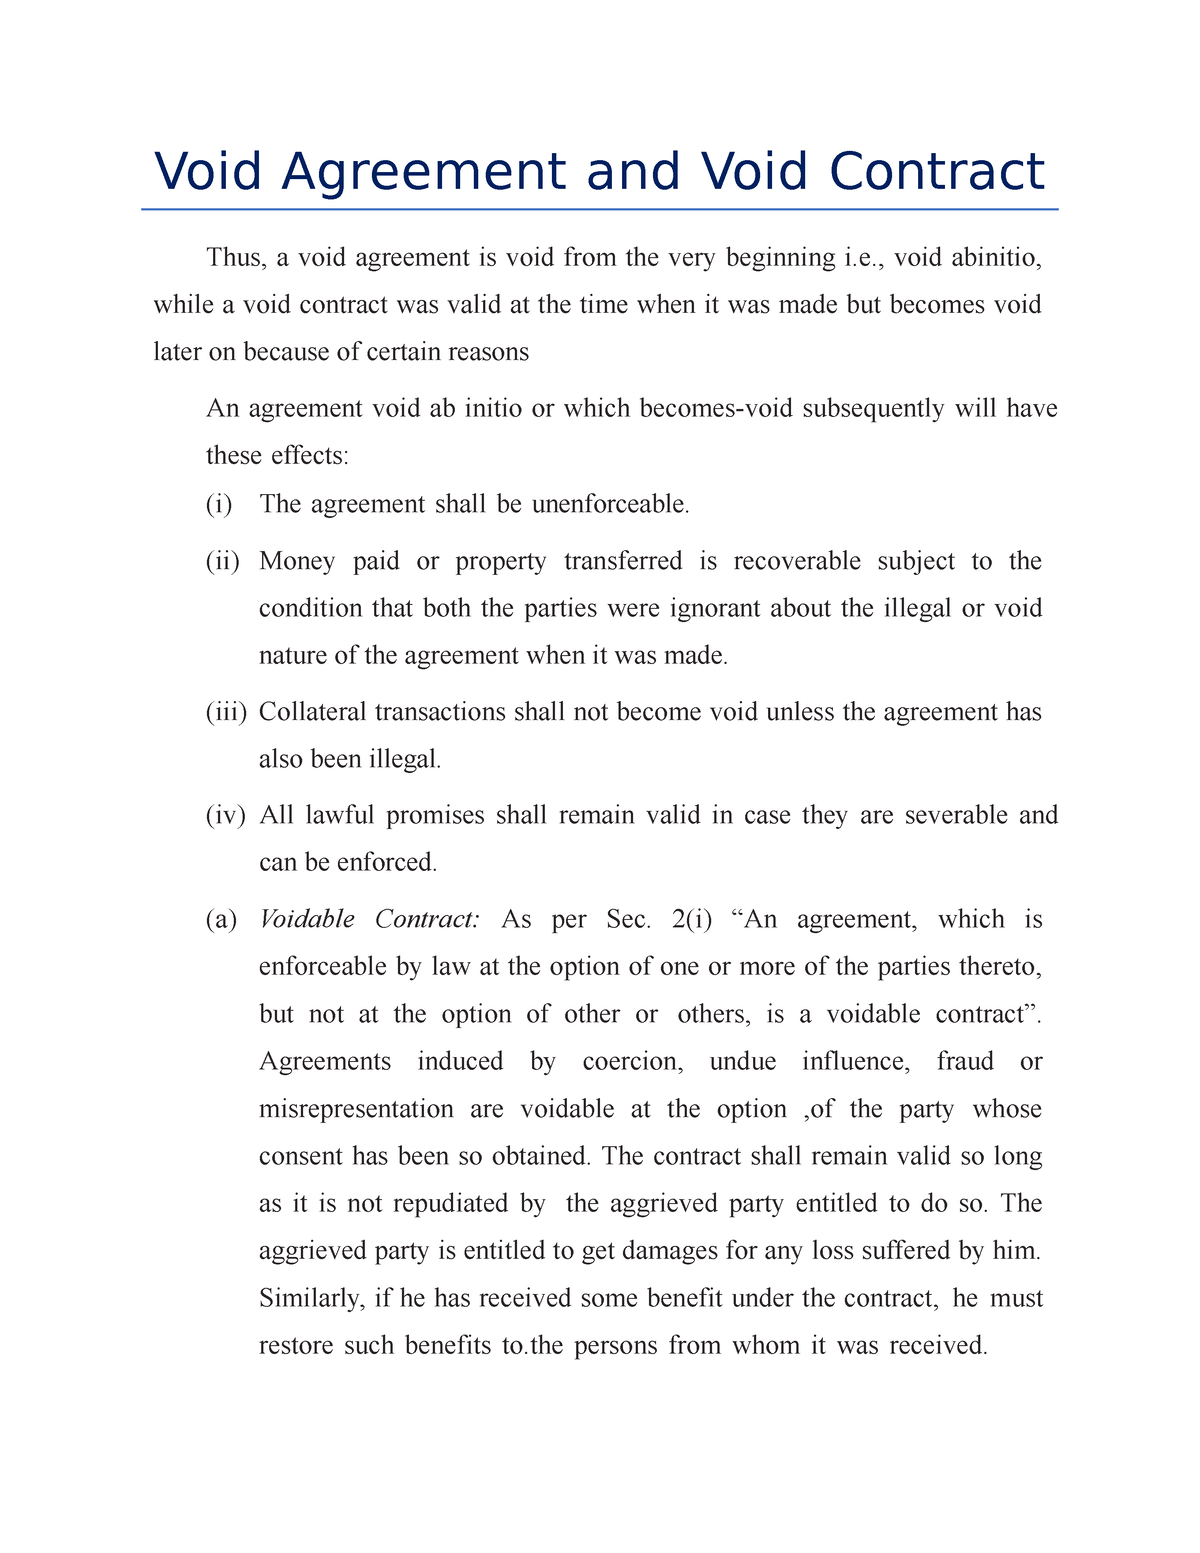 assignment on void agreement